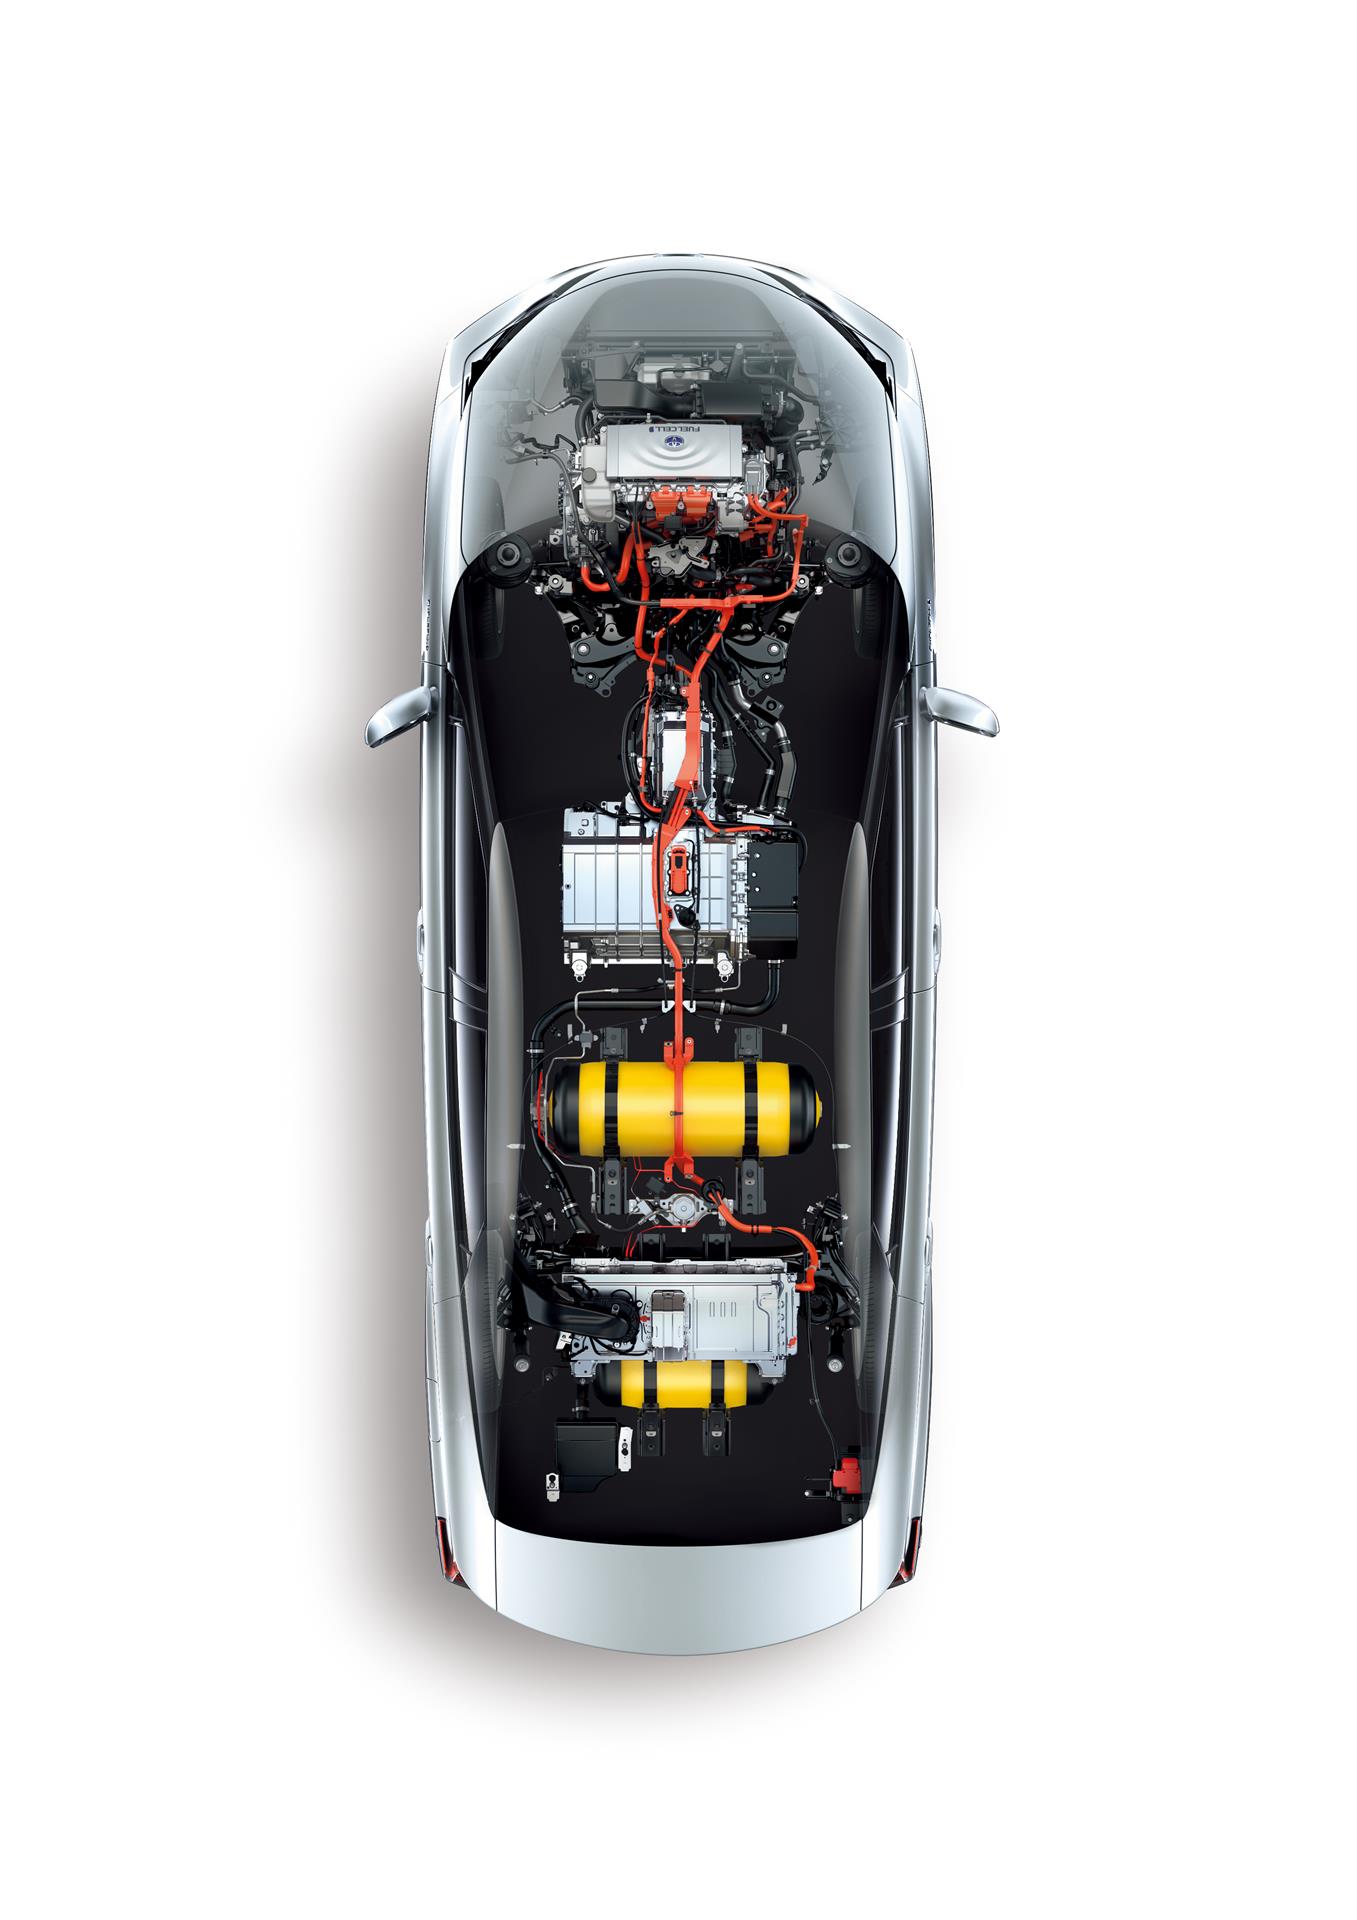 Toyota Fuel Cell System (TFCV)